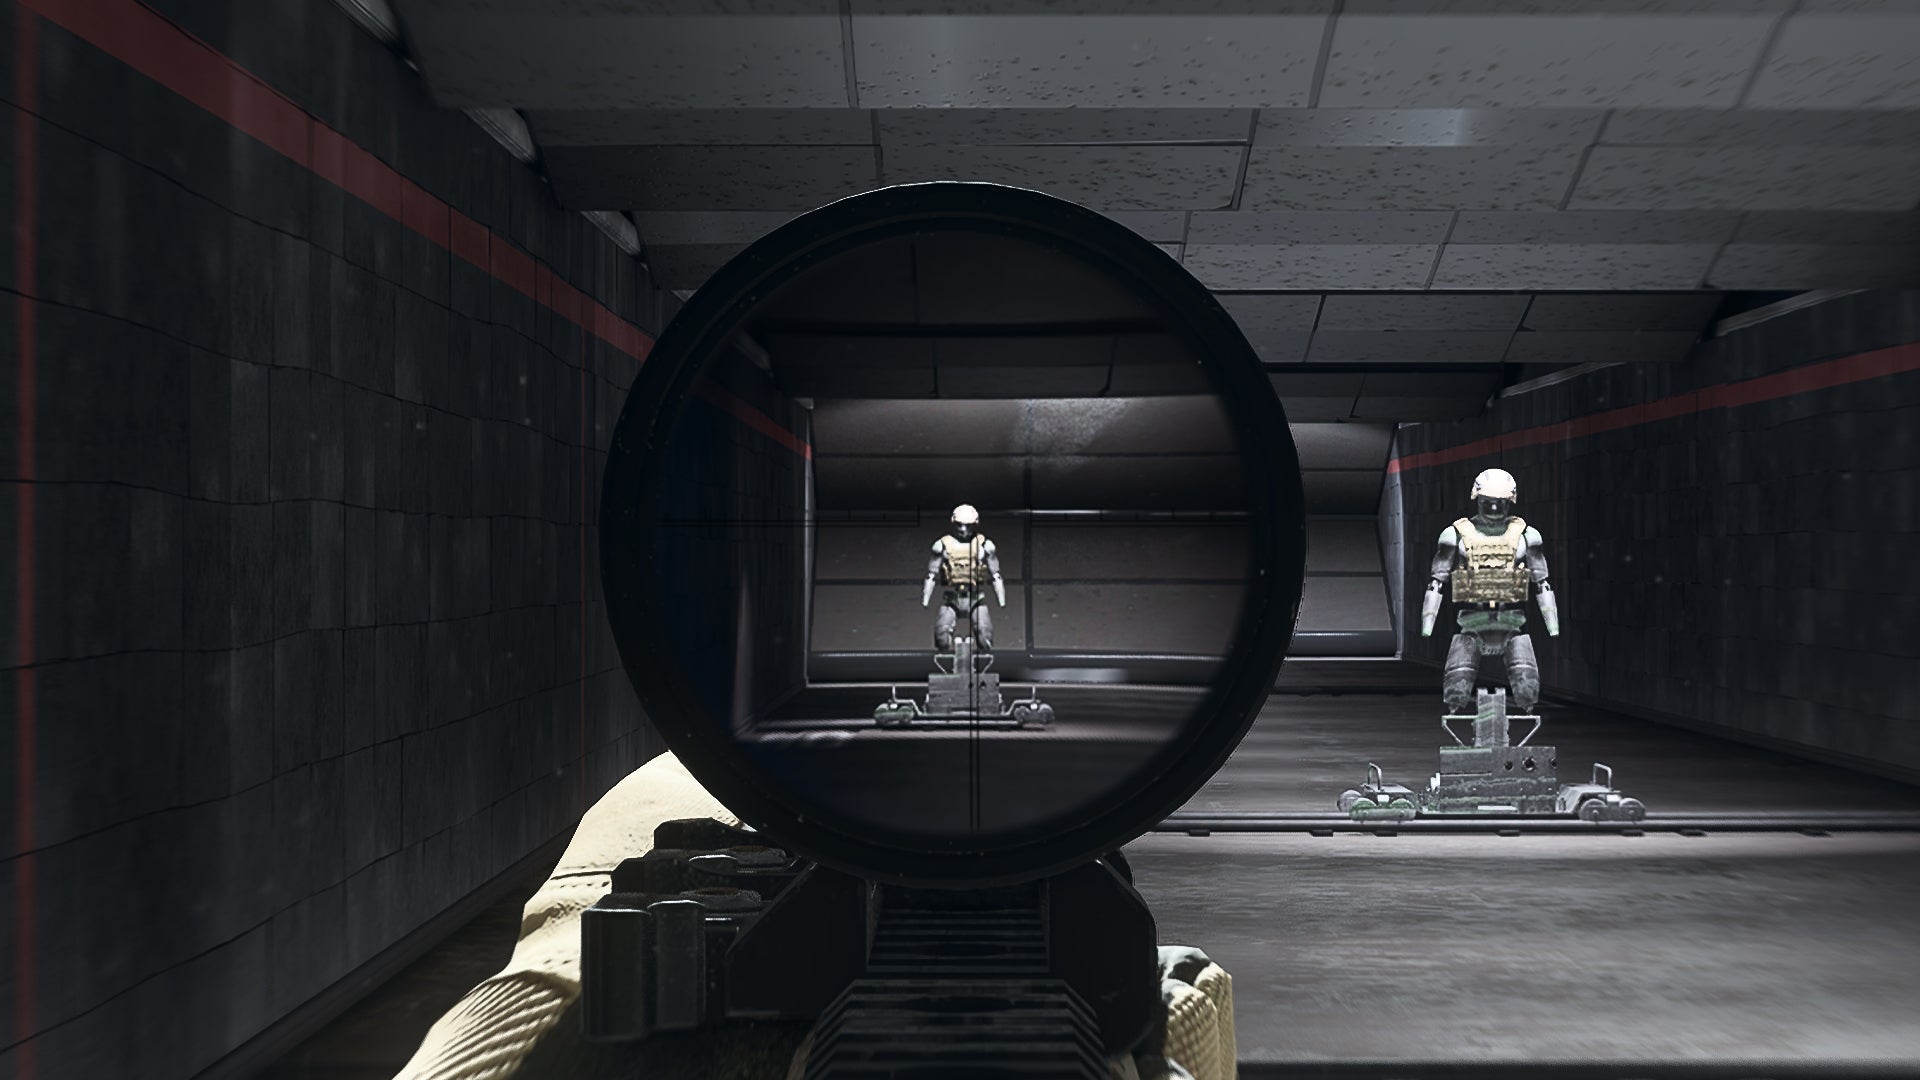 The player in Warzone 2.0 aims at a training dummy using the HMW-20 Optic optic attachment.